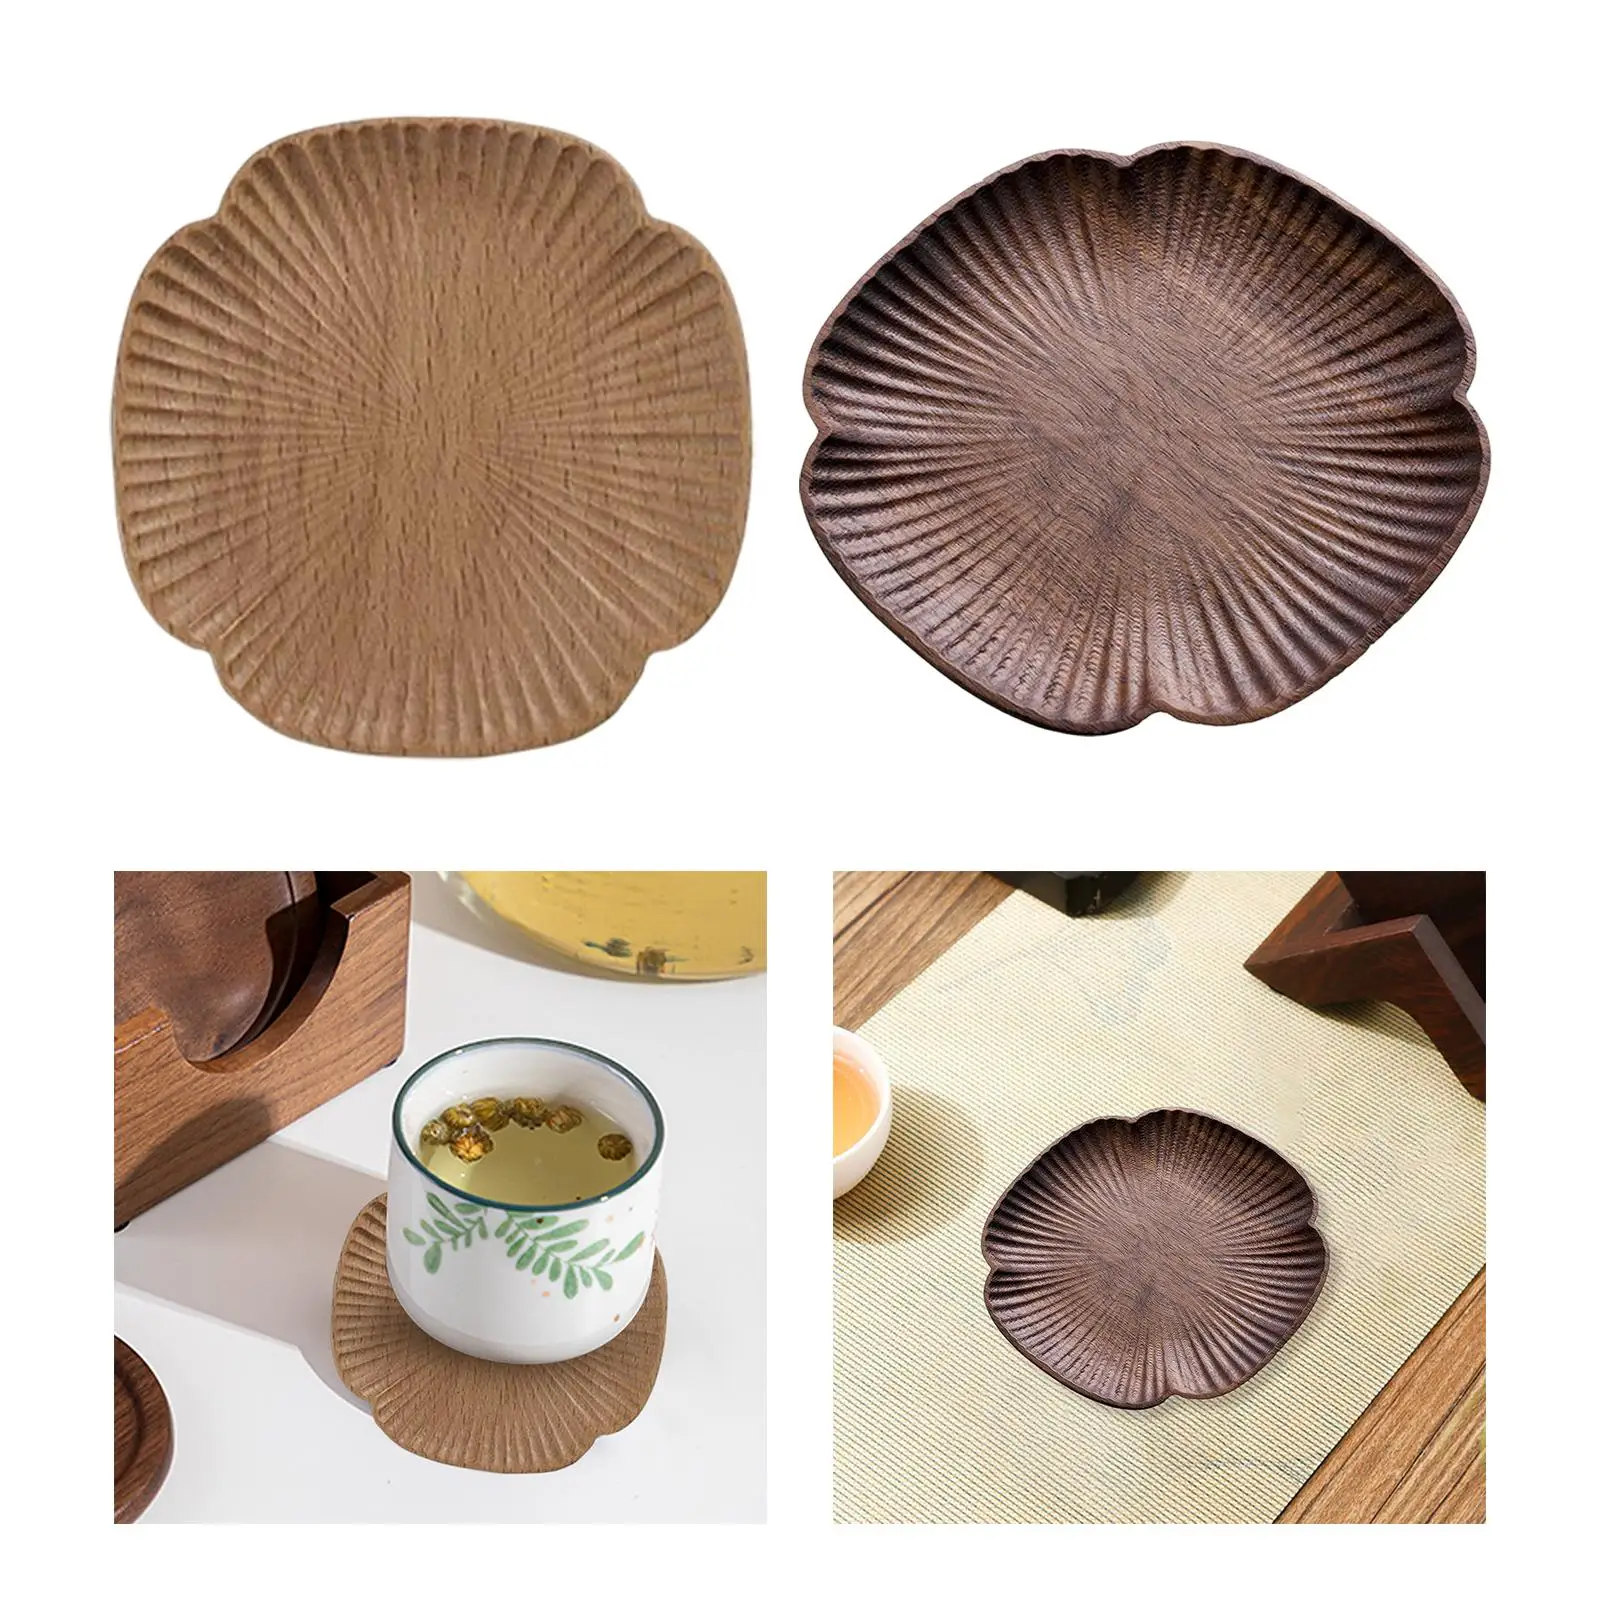 Wooden Coaster Cup Mat Petal Kitchen Gadget Multipurpose Heat Insulation Washable Durable for Household Dinnerware Living Room